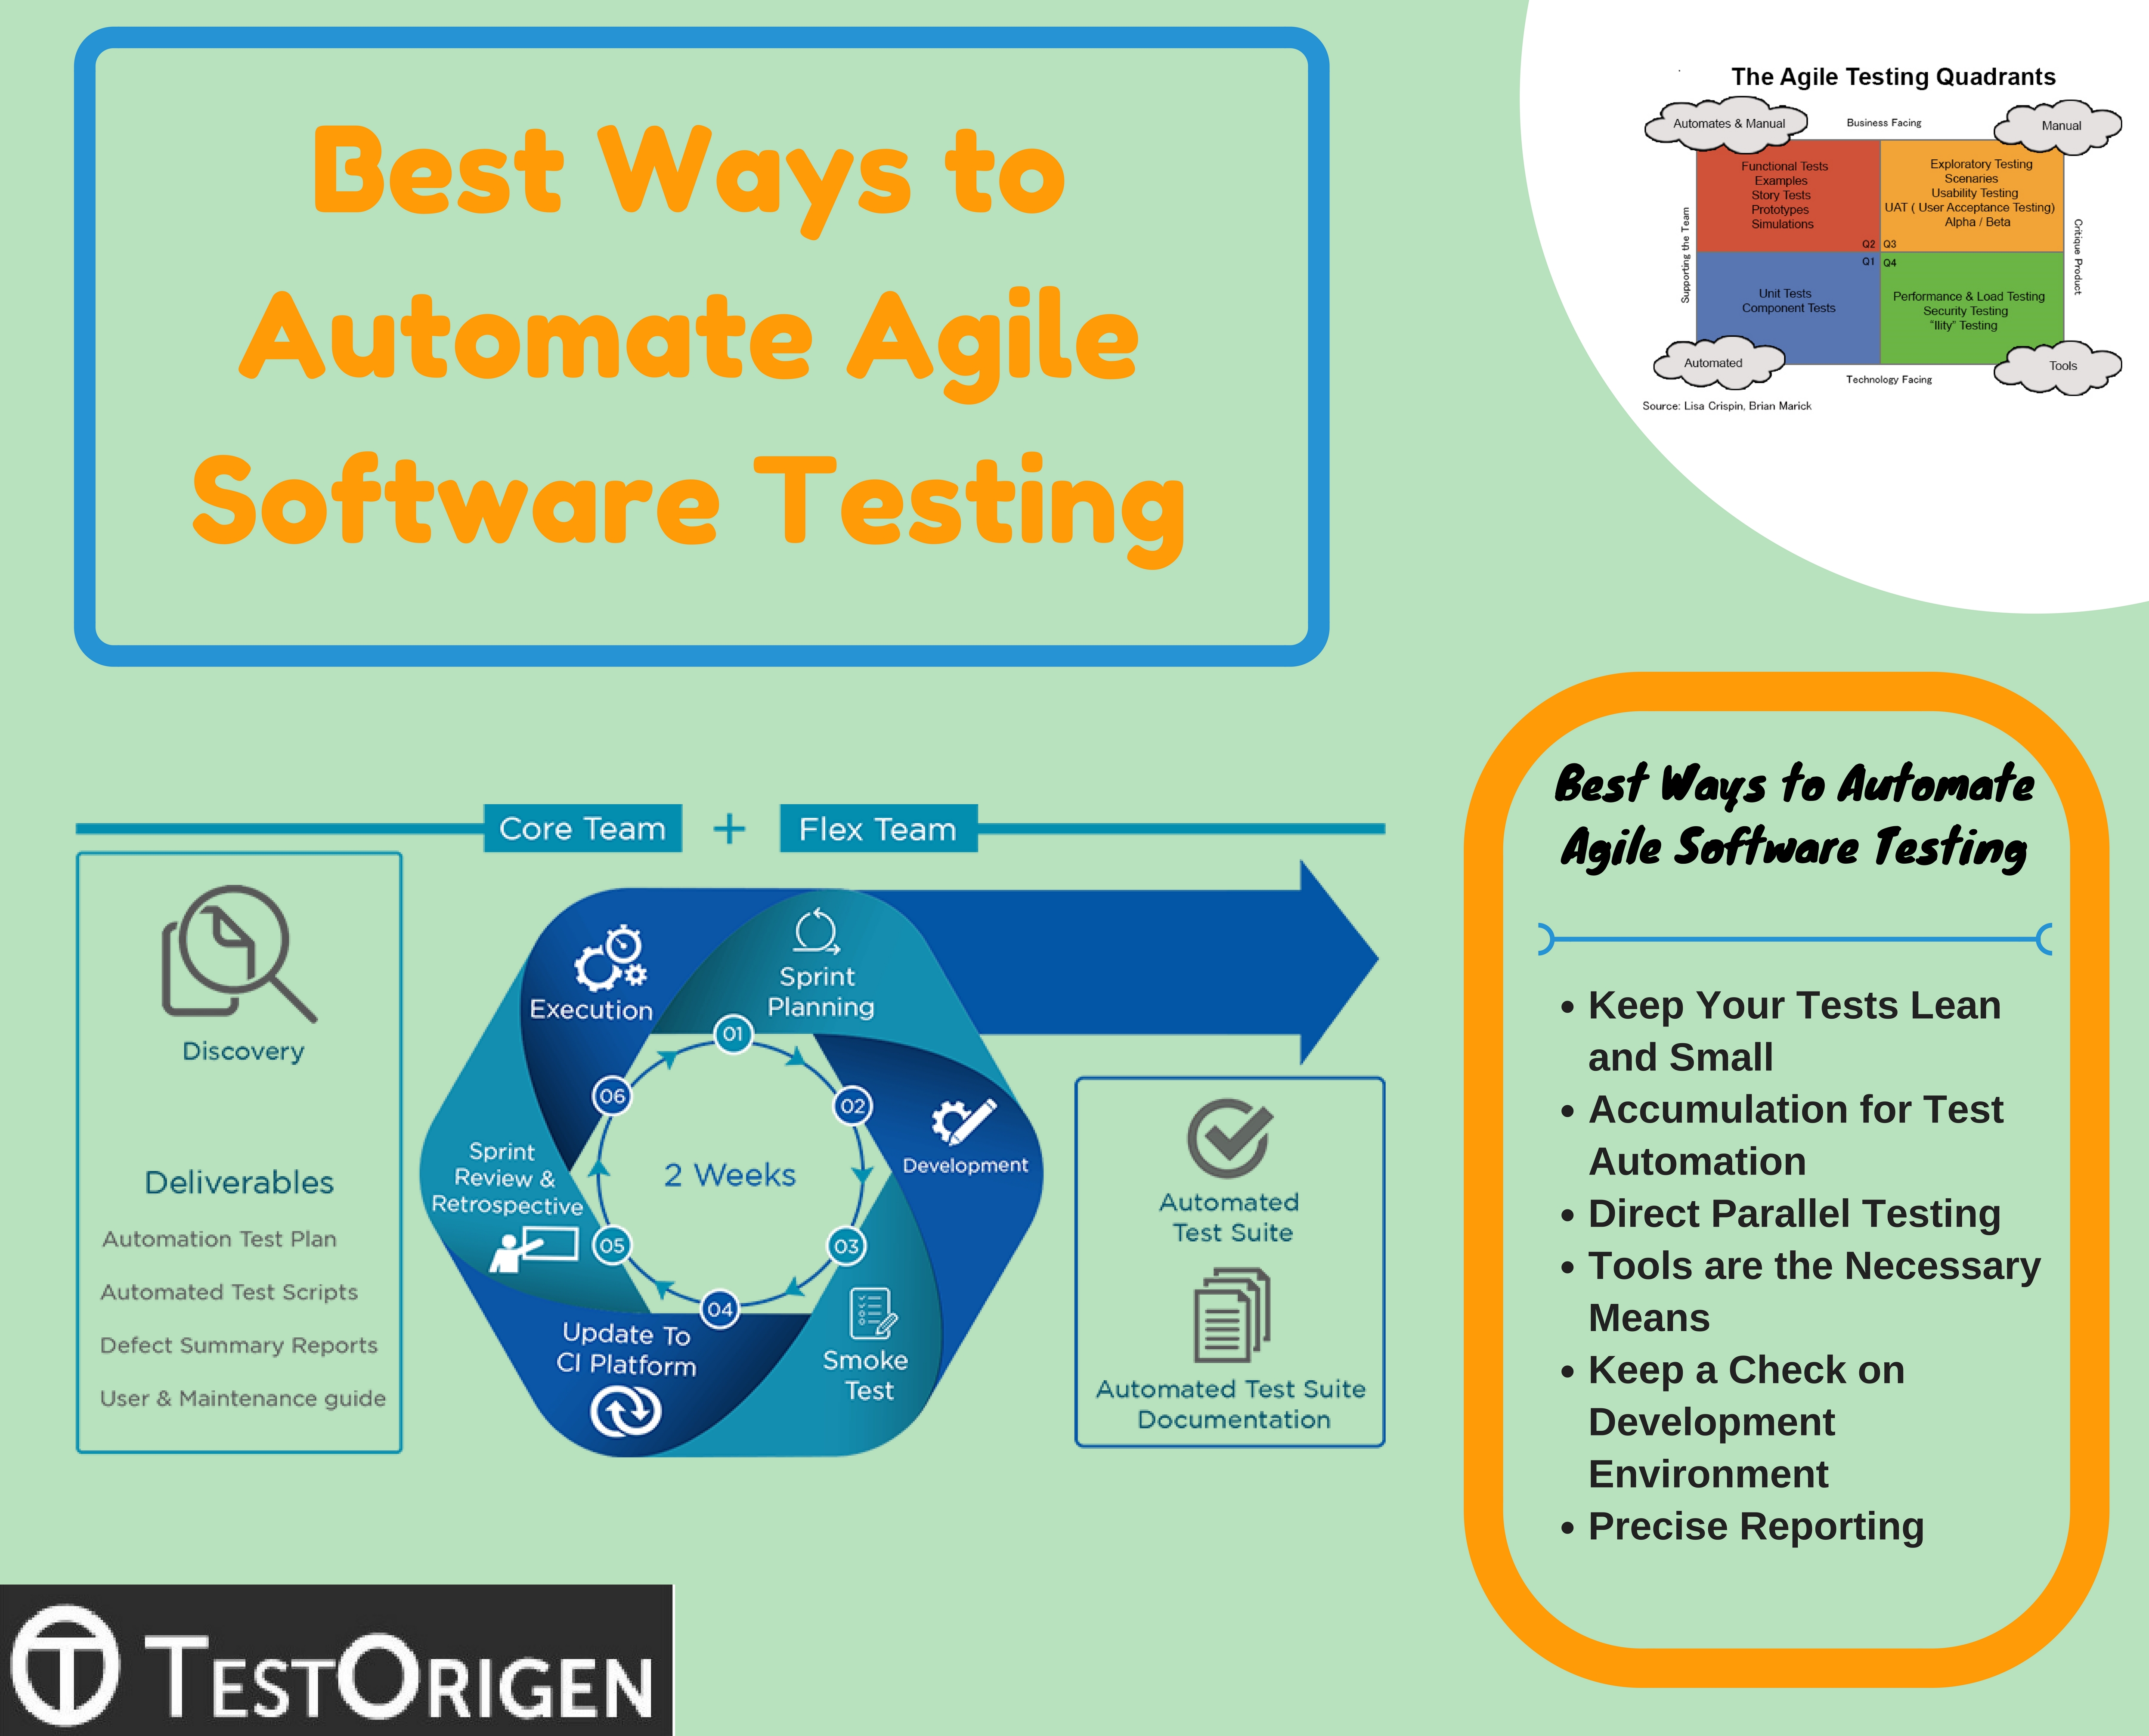 Best Ways to Automate Agile Software Testing